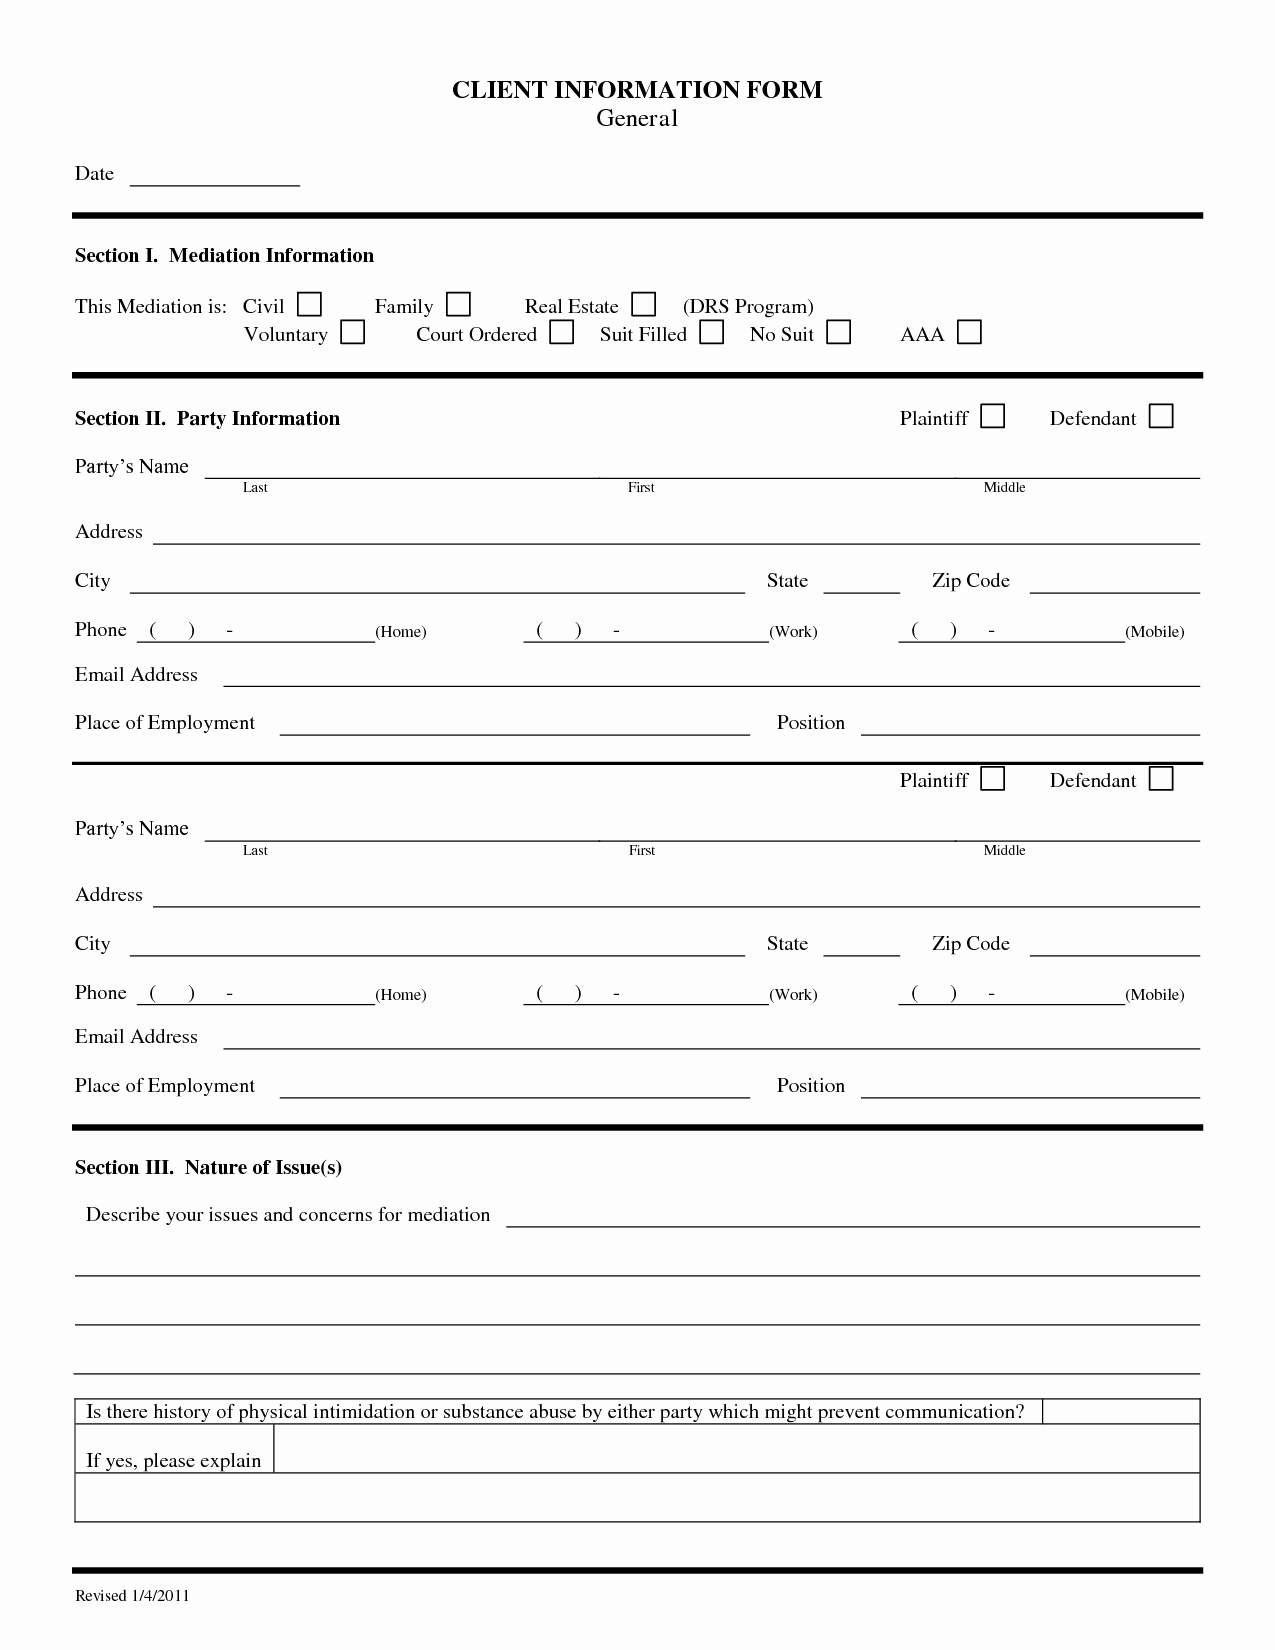 Customer Contact Information form Template Beautiful Real Estate New Client Information form Template